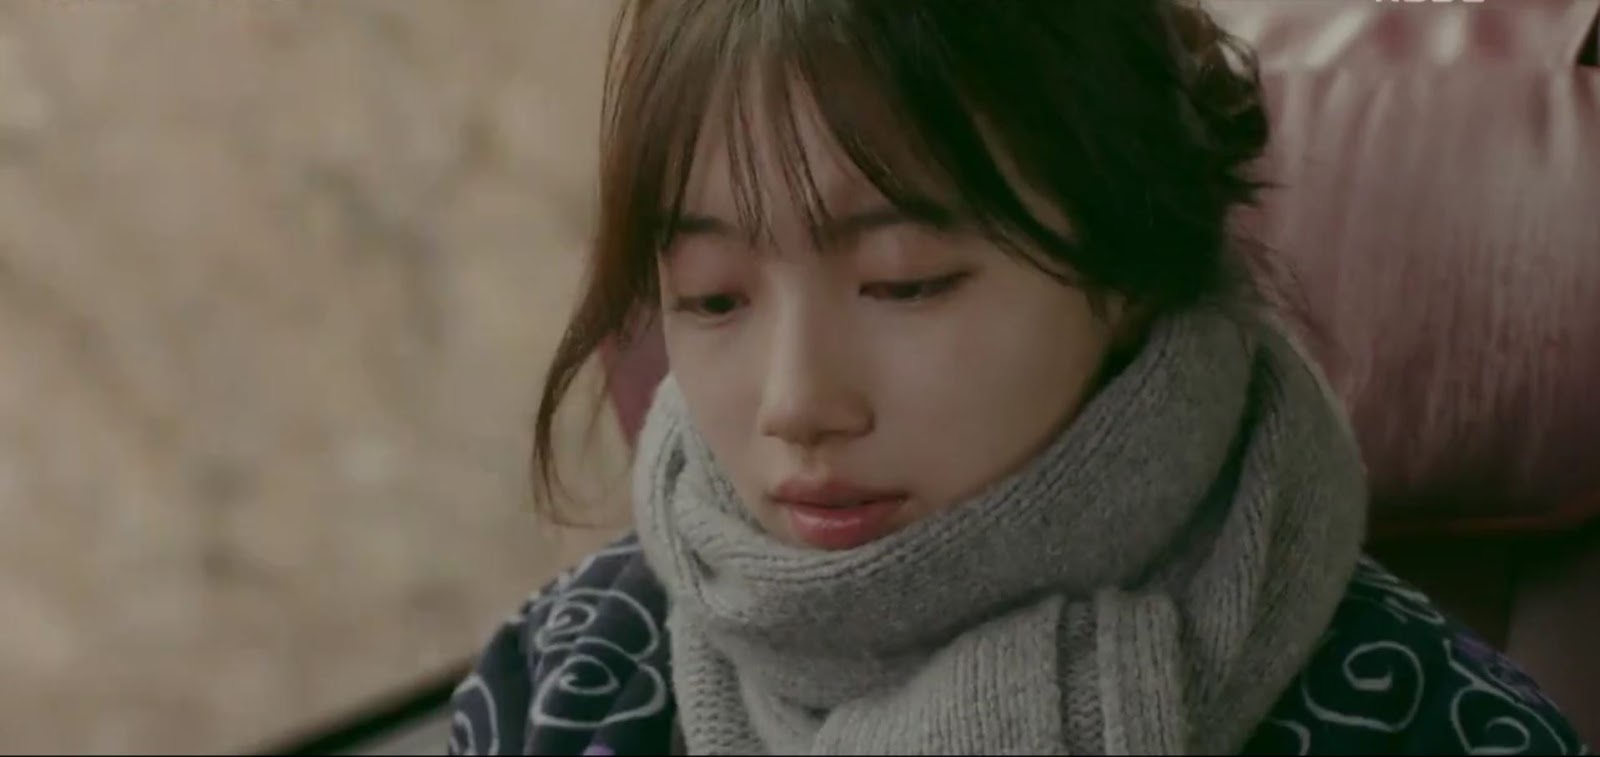 All Star Eng Sub: Uncontrollably Fond EP.6 Eng Sub - Korea 